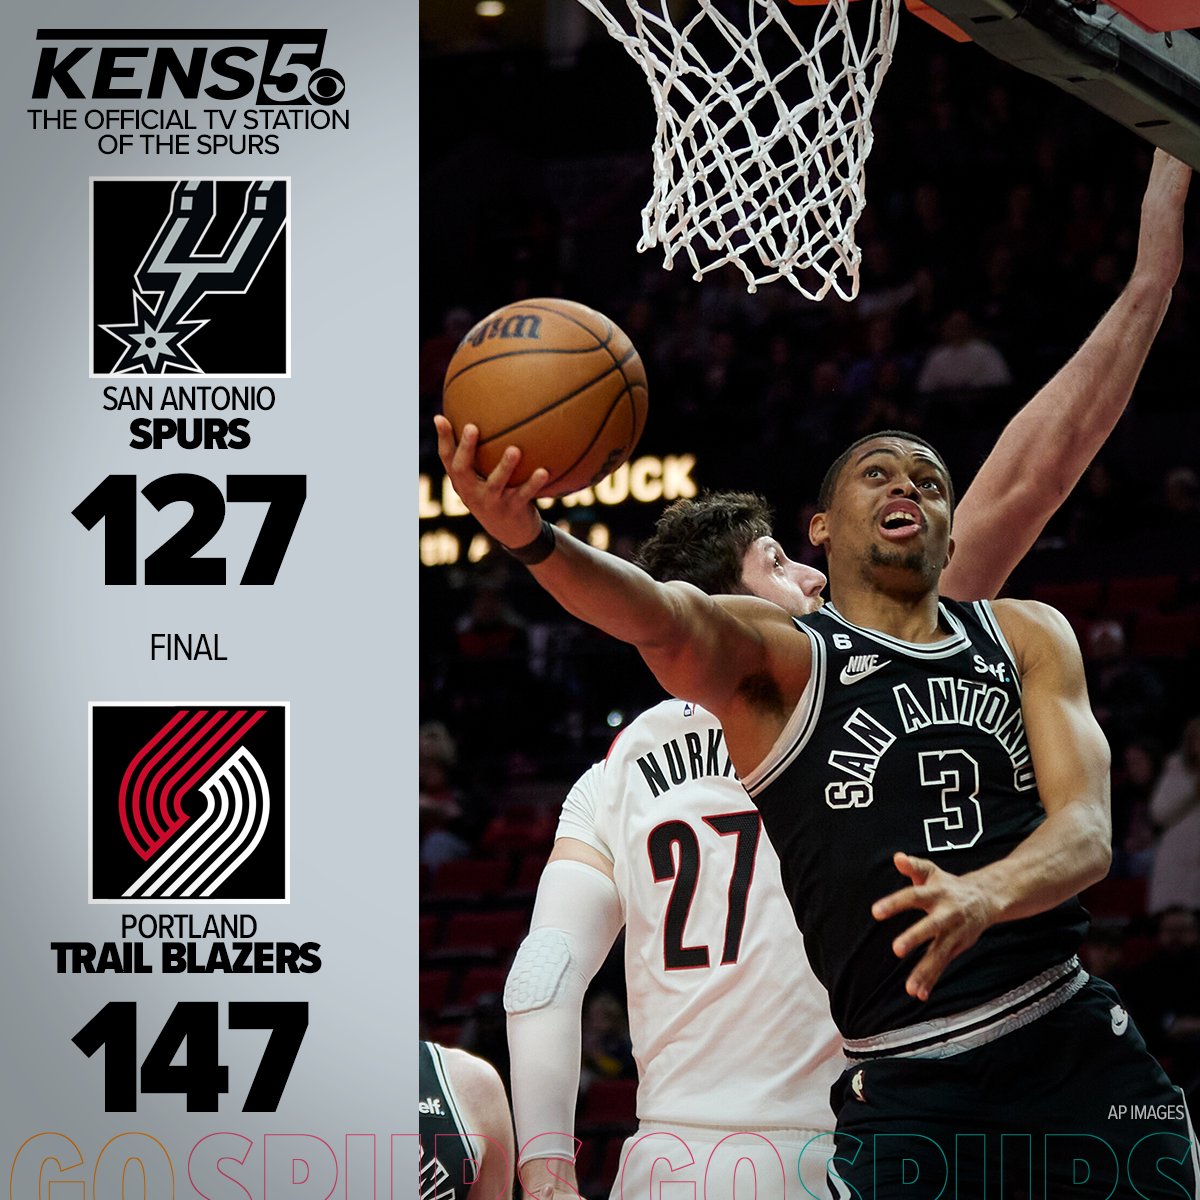 Keldon led the way with 20 points and Jeremy Sochan had another impressive game, but the Spurs fell short in a shootout in Portland. 

Recap:

https://t.co/PSRYHiq6Nr https://t.co/lHPfcBM7Cm